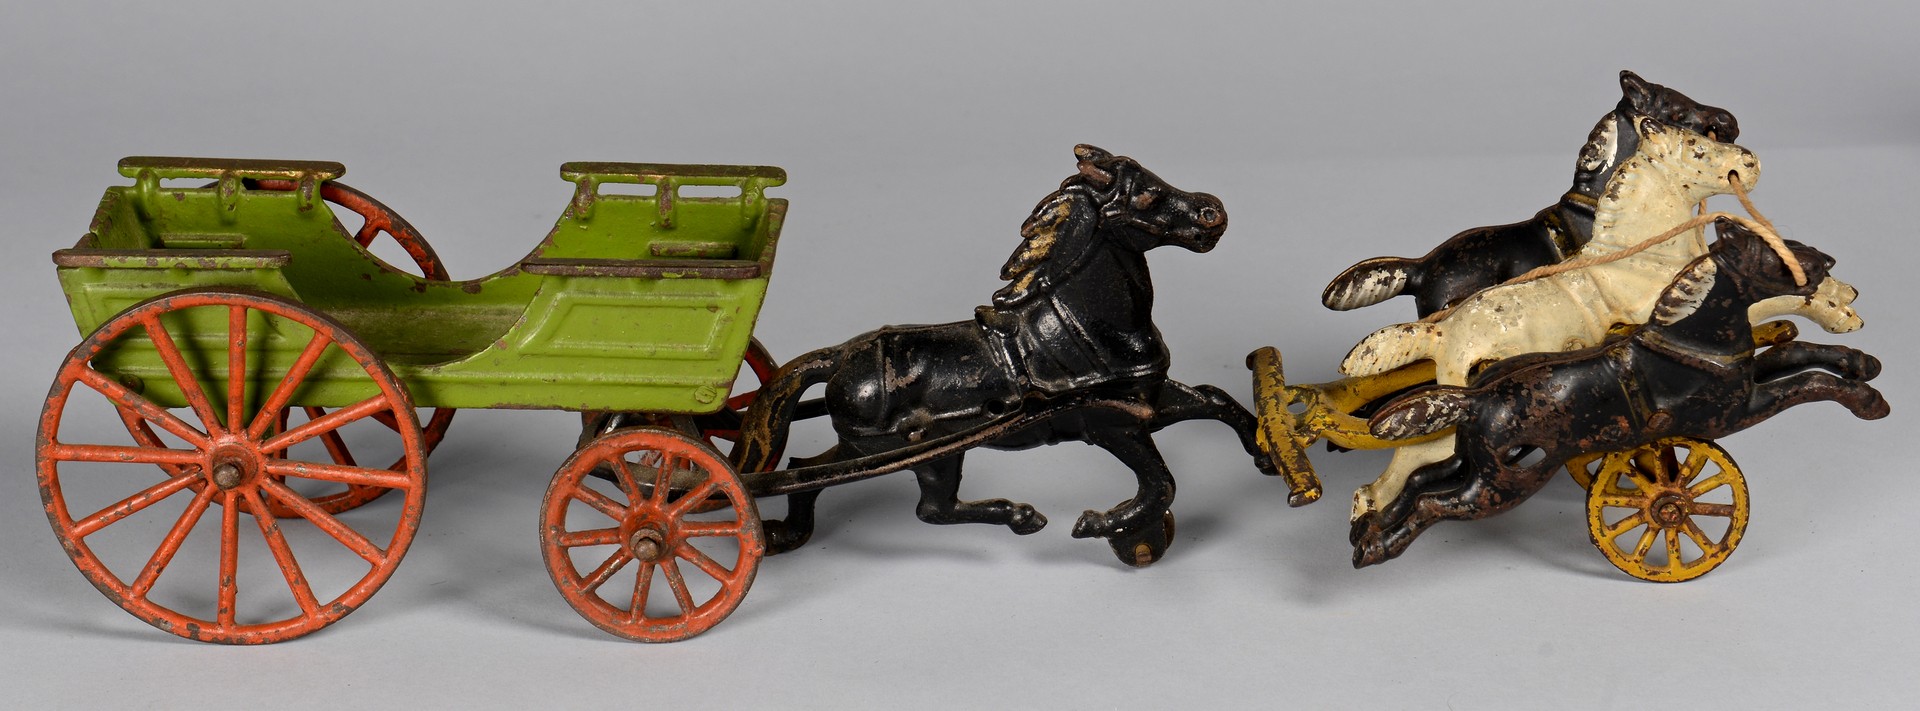 Lot 854: Assorted Cast Iron and Toy Items